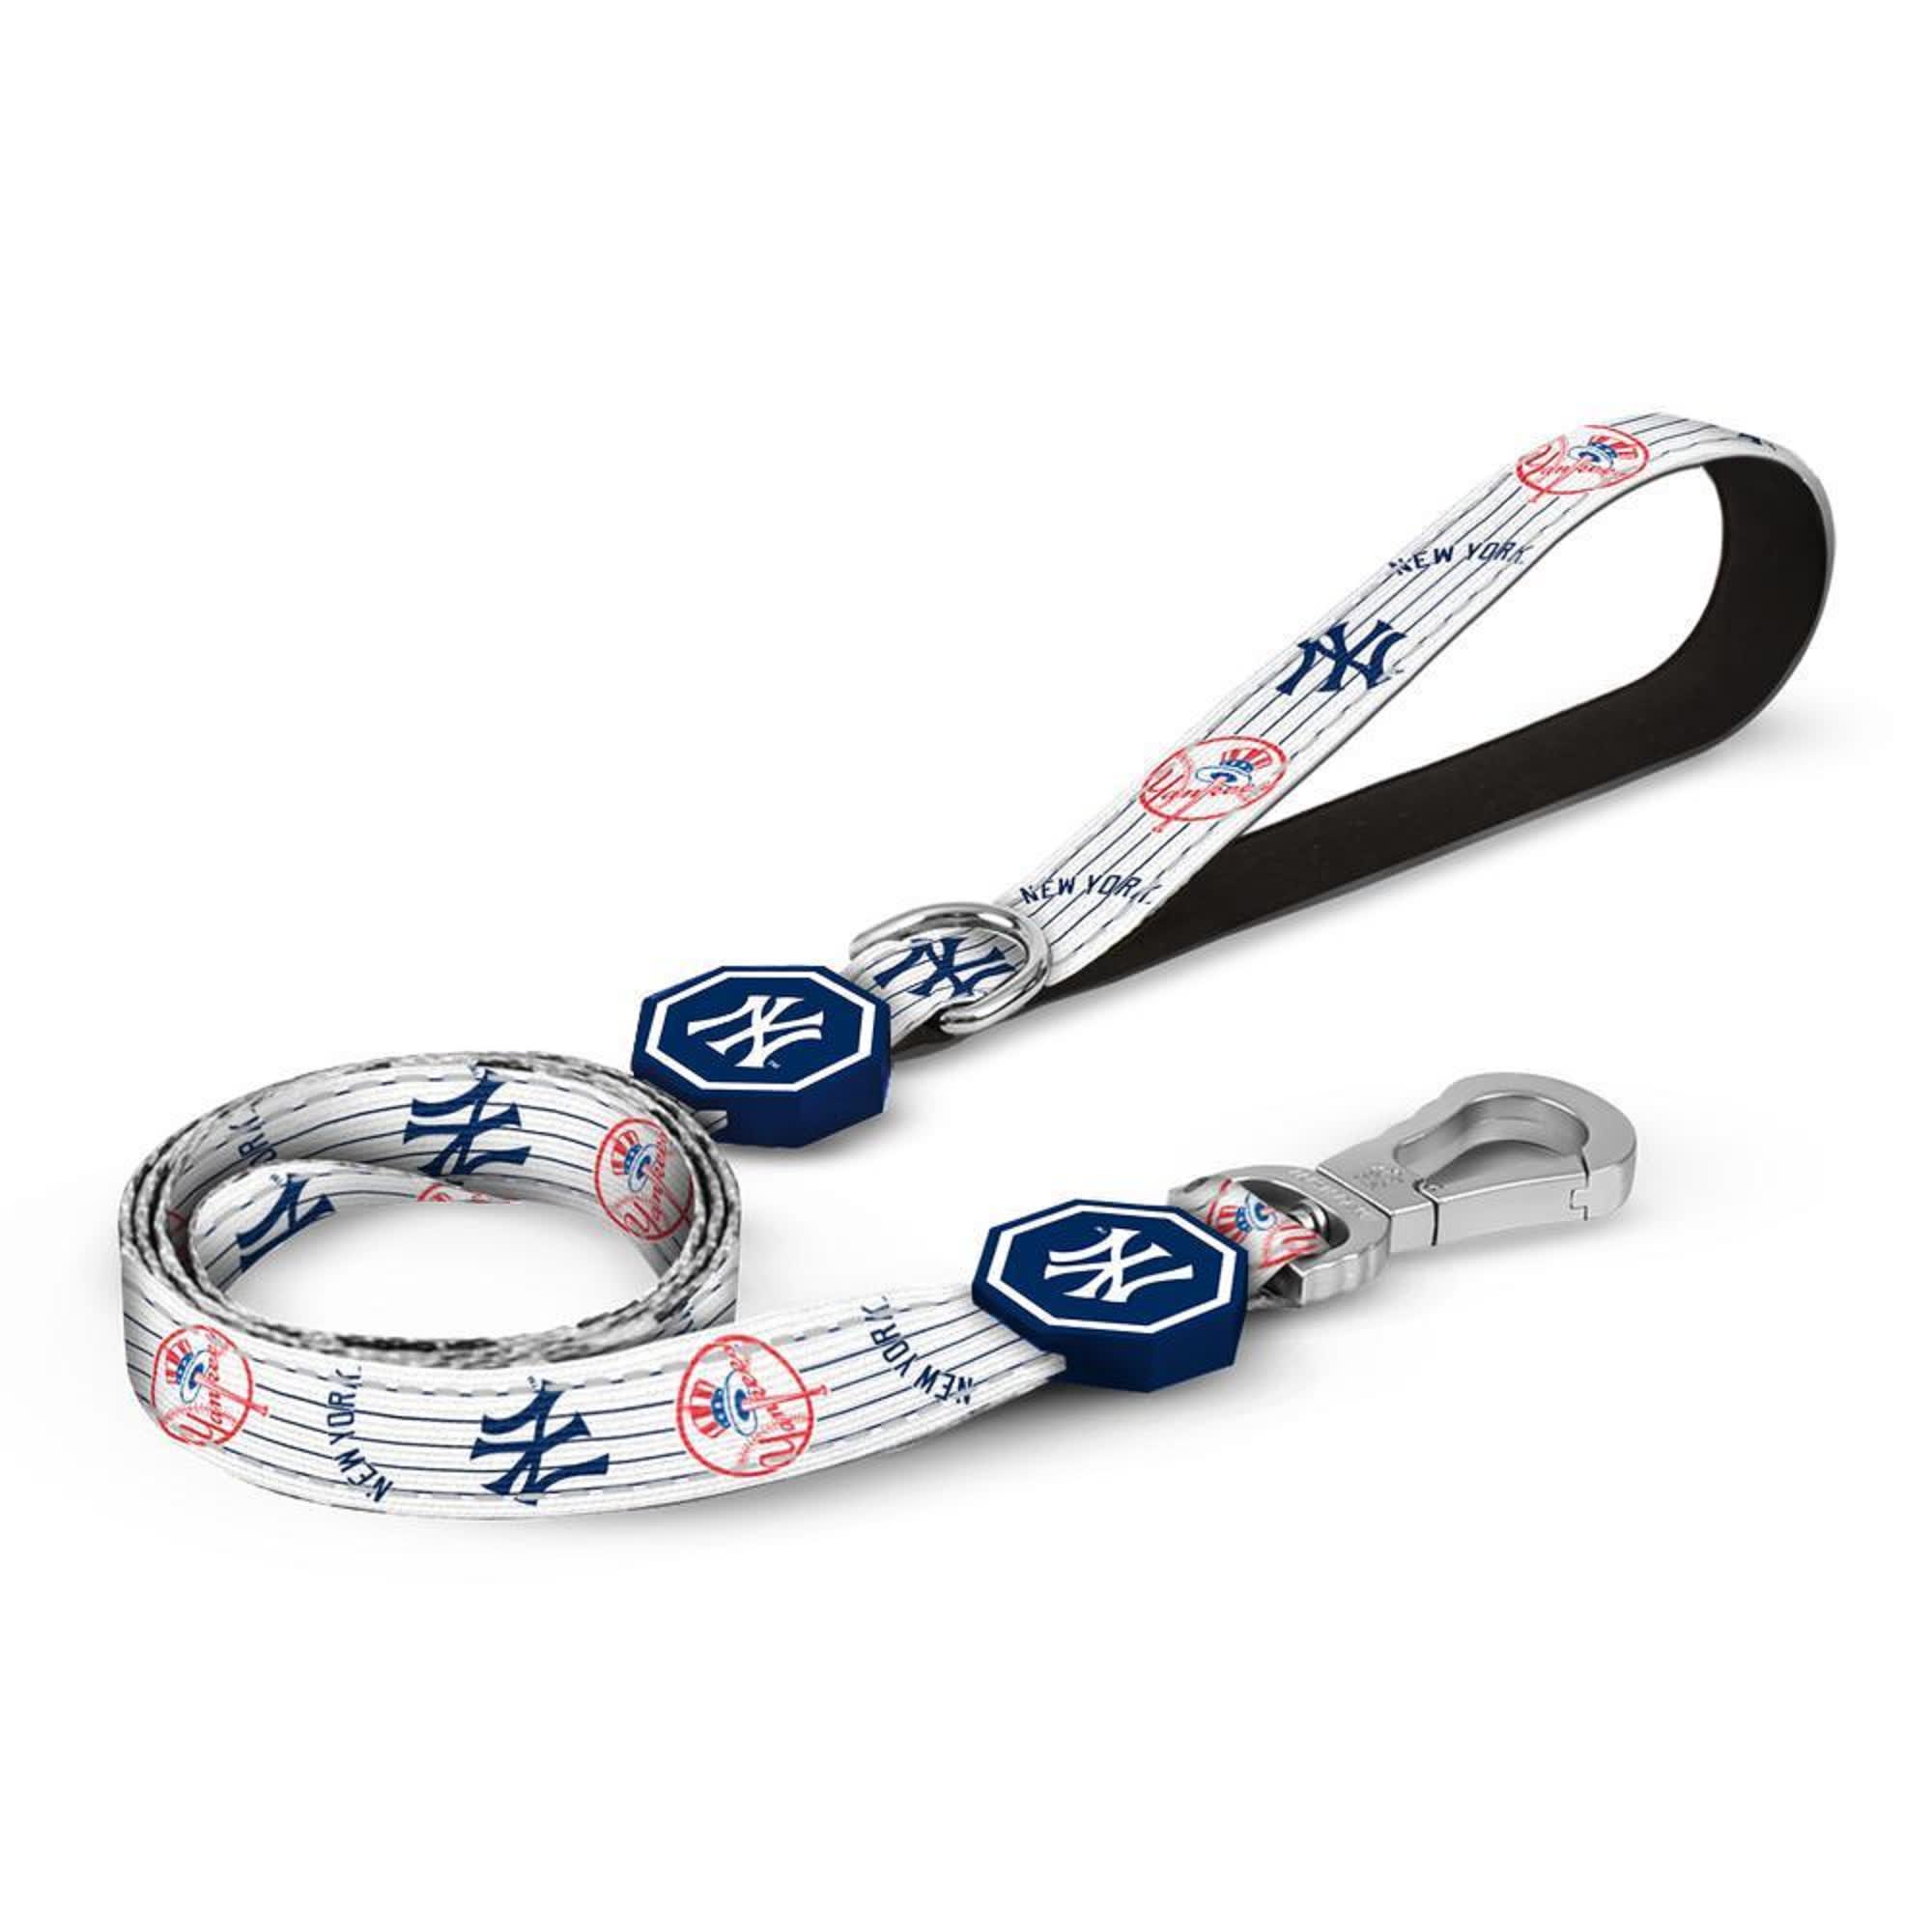 Official New York Yankees Pet Gear, Yankees Collars, Leashes, Chew